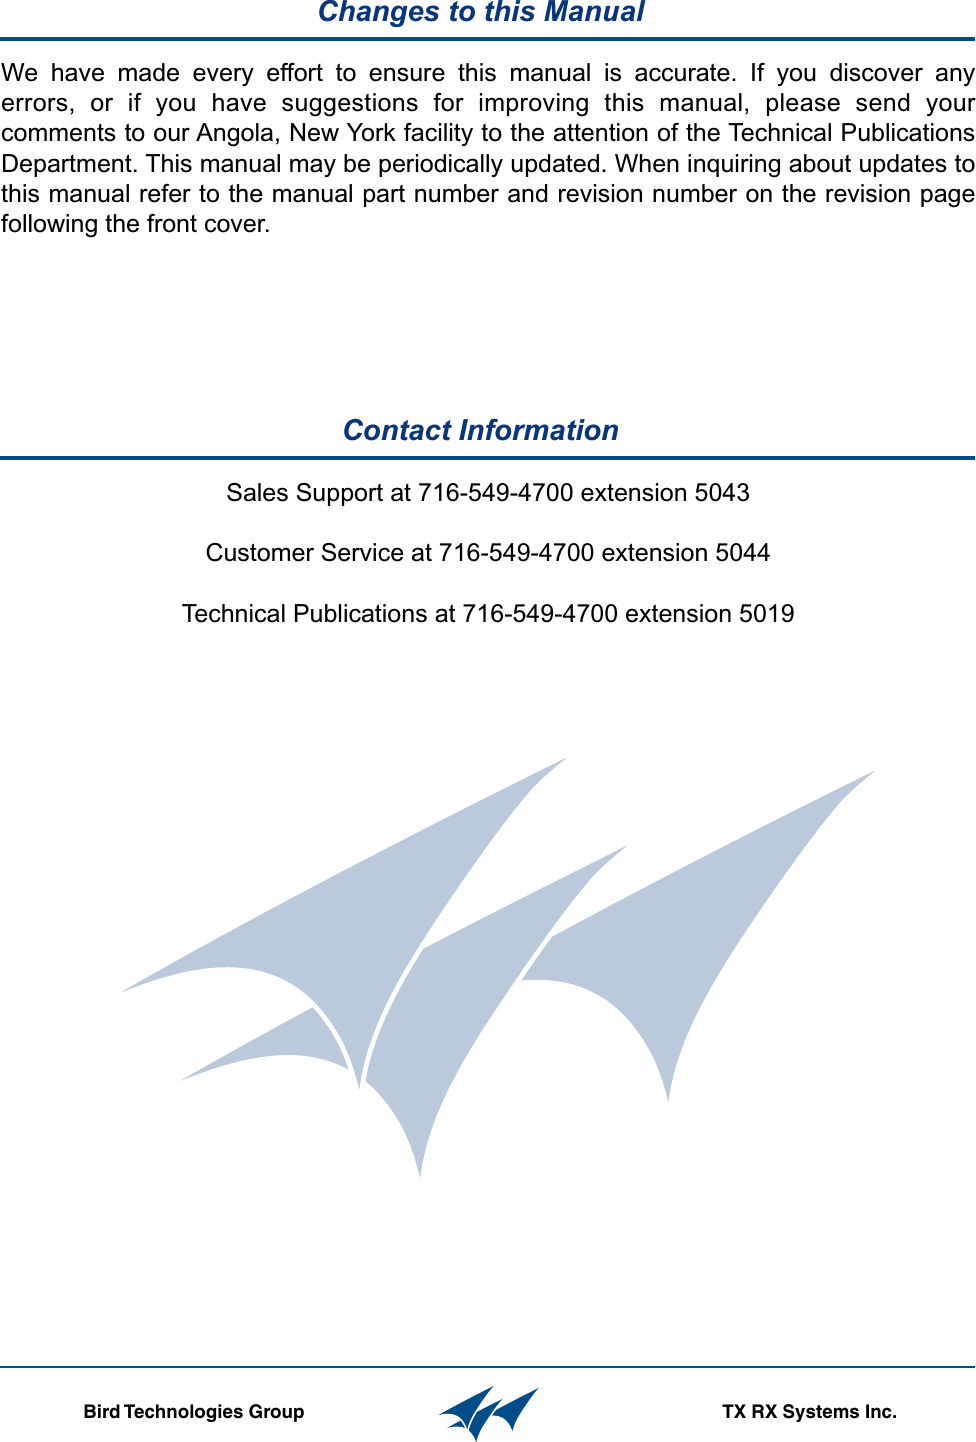 Table of Contents                                                     Manual 7-9469-1.1                                                        06/10/09Contact Information  Changes to this Manual                  Bird Technologies Group TX RX Systems Inc.Sales Support at 716-549-4700 extension 5043Customer Service at 716-549-4700 extension 5044Technical Publications at 716-549-4700 extension 5019We have made every effort to ensure this manual is accurate. If you discover any errors, or if you have suggestions for improving this manual, please send your comments to our Angola, New York facility to the attention of the Technical Publications Department. This manual may be periodically updated. When inquiring about updates to this manual refer to the manual part number and revision number on the revision page following the front cover.